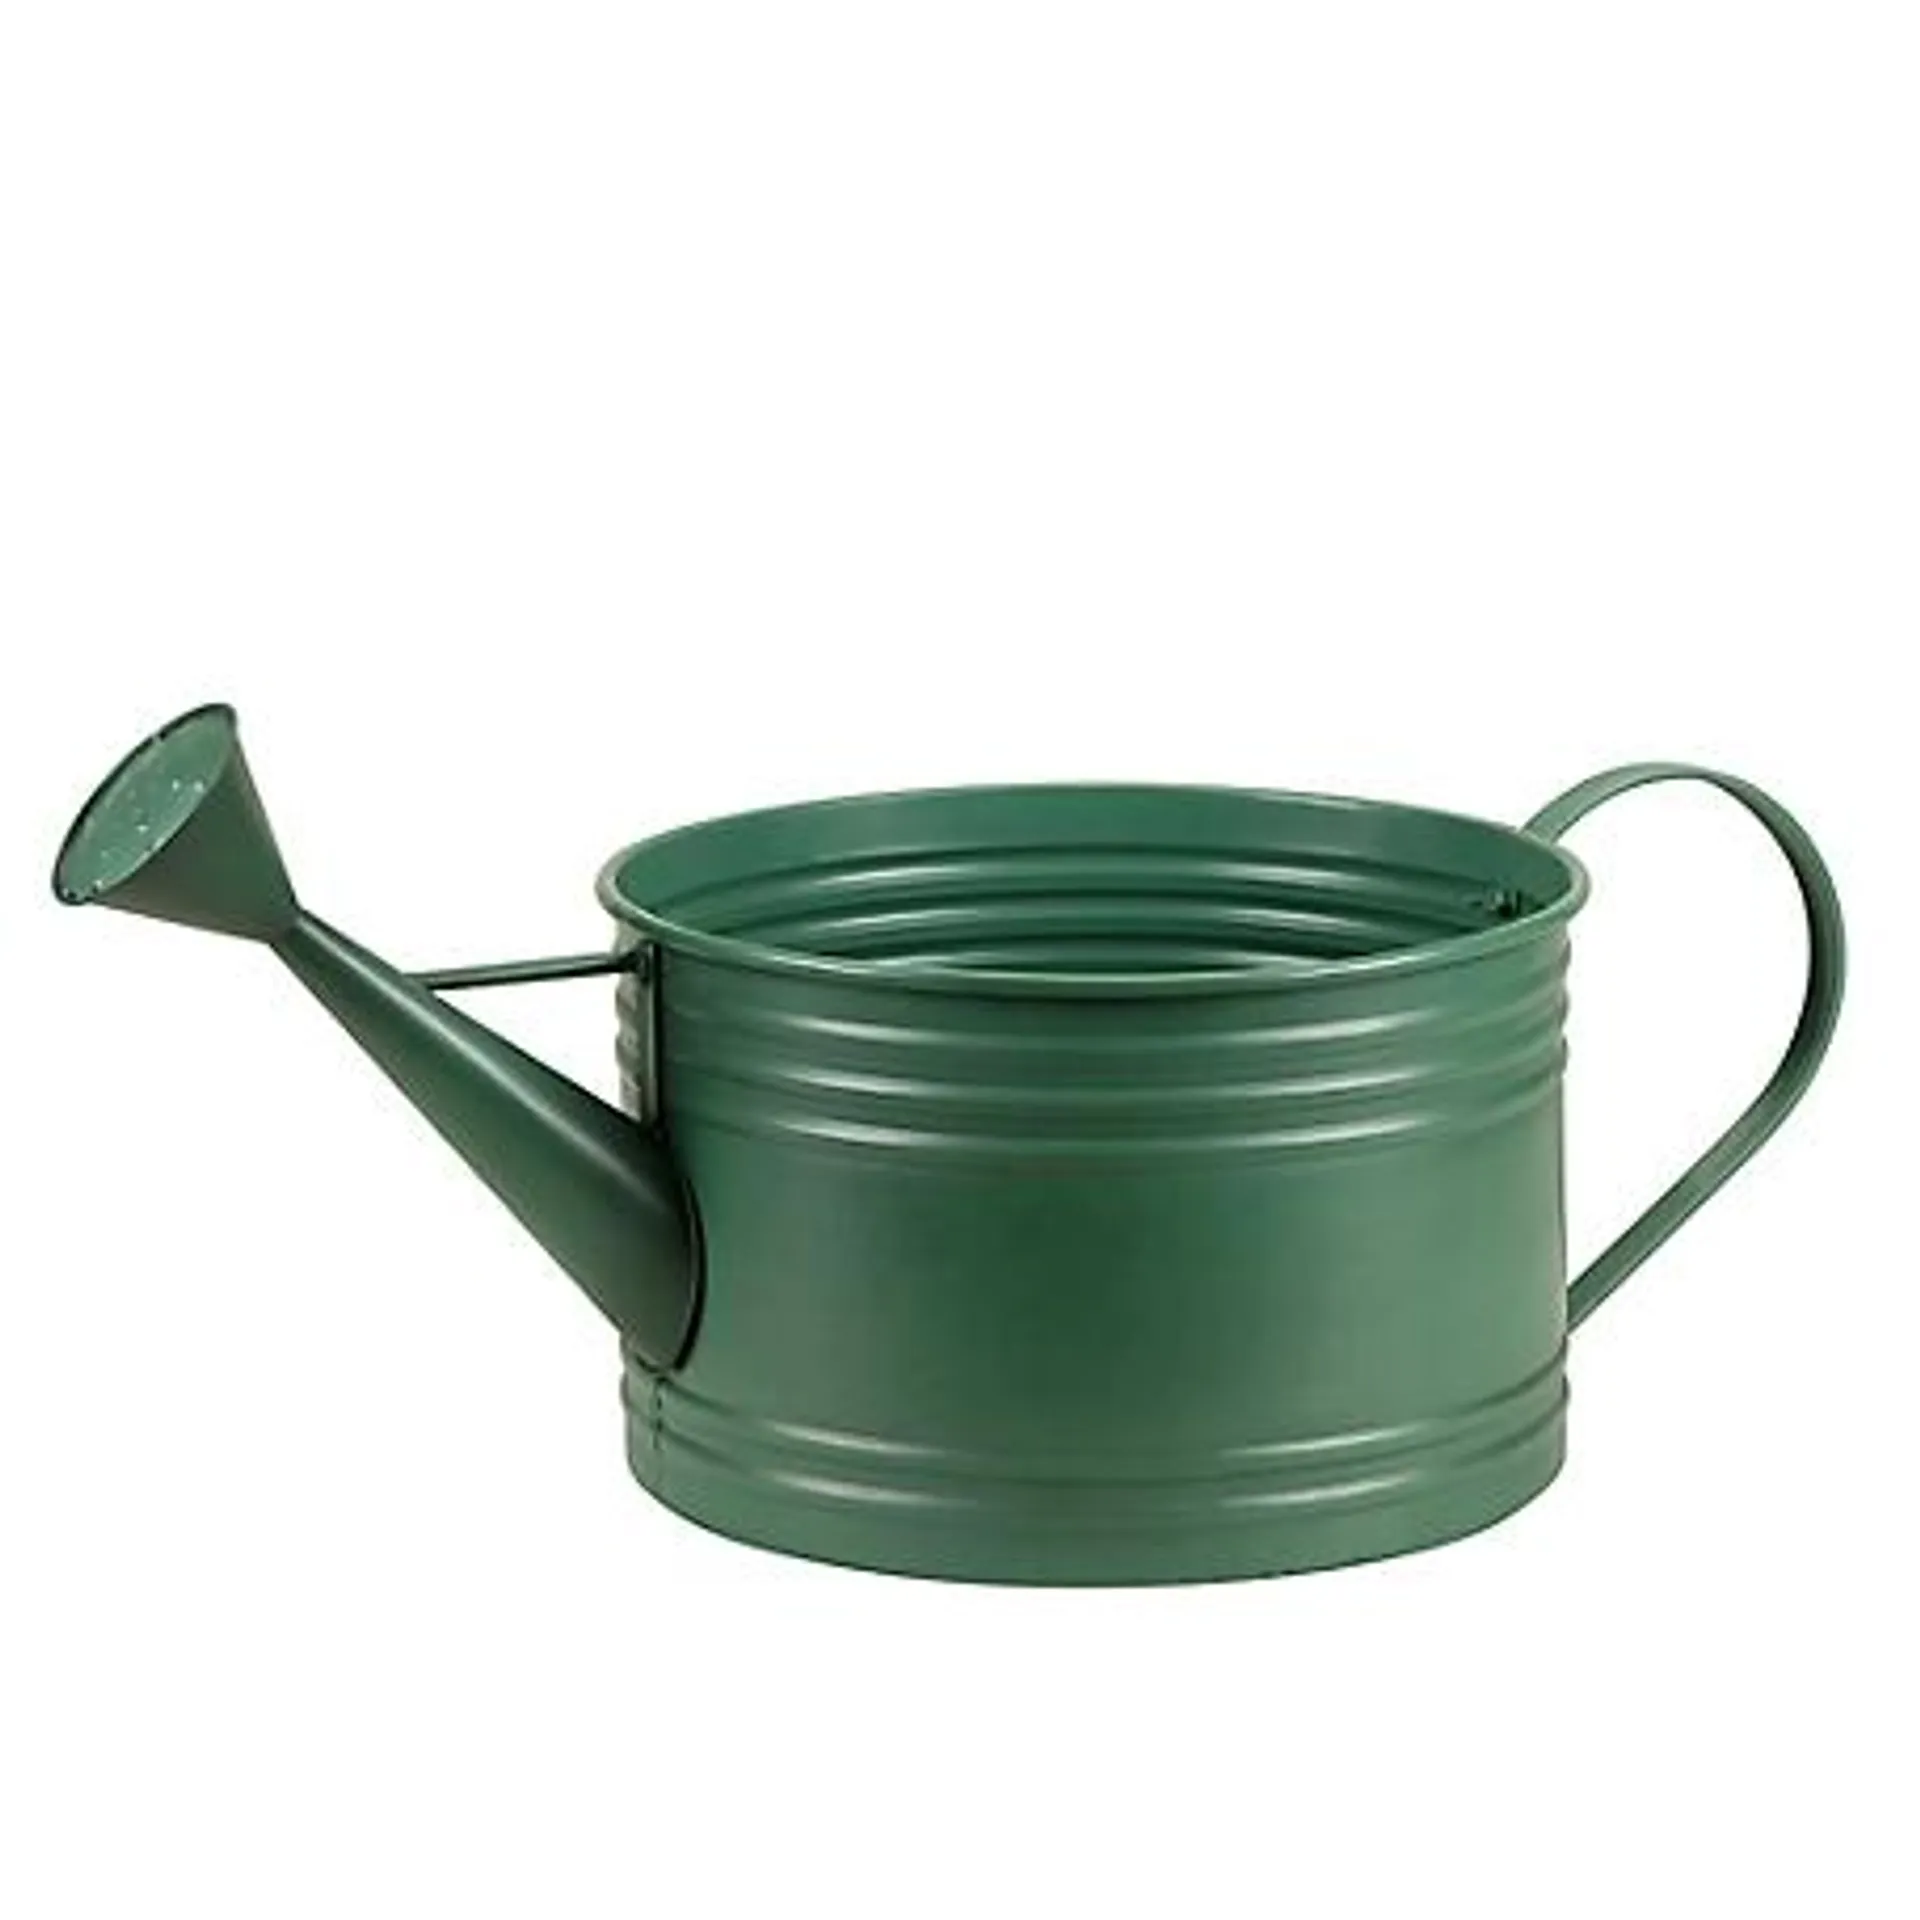 Red Shed 10 lb. Watering Can Planter